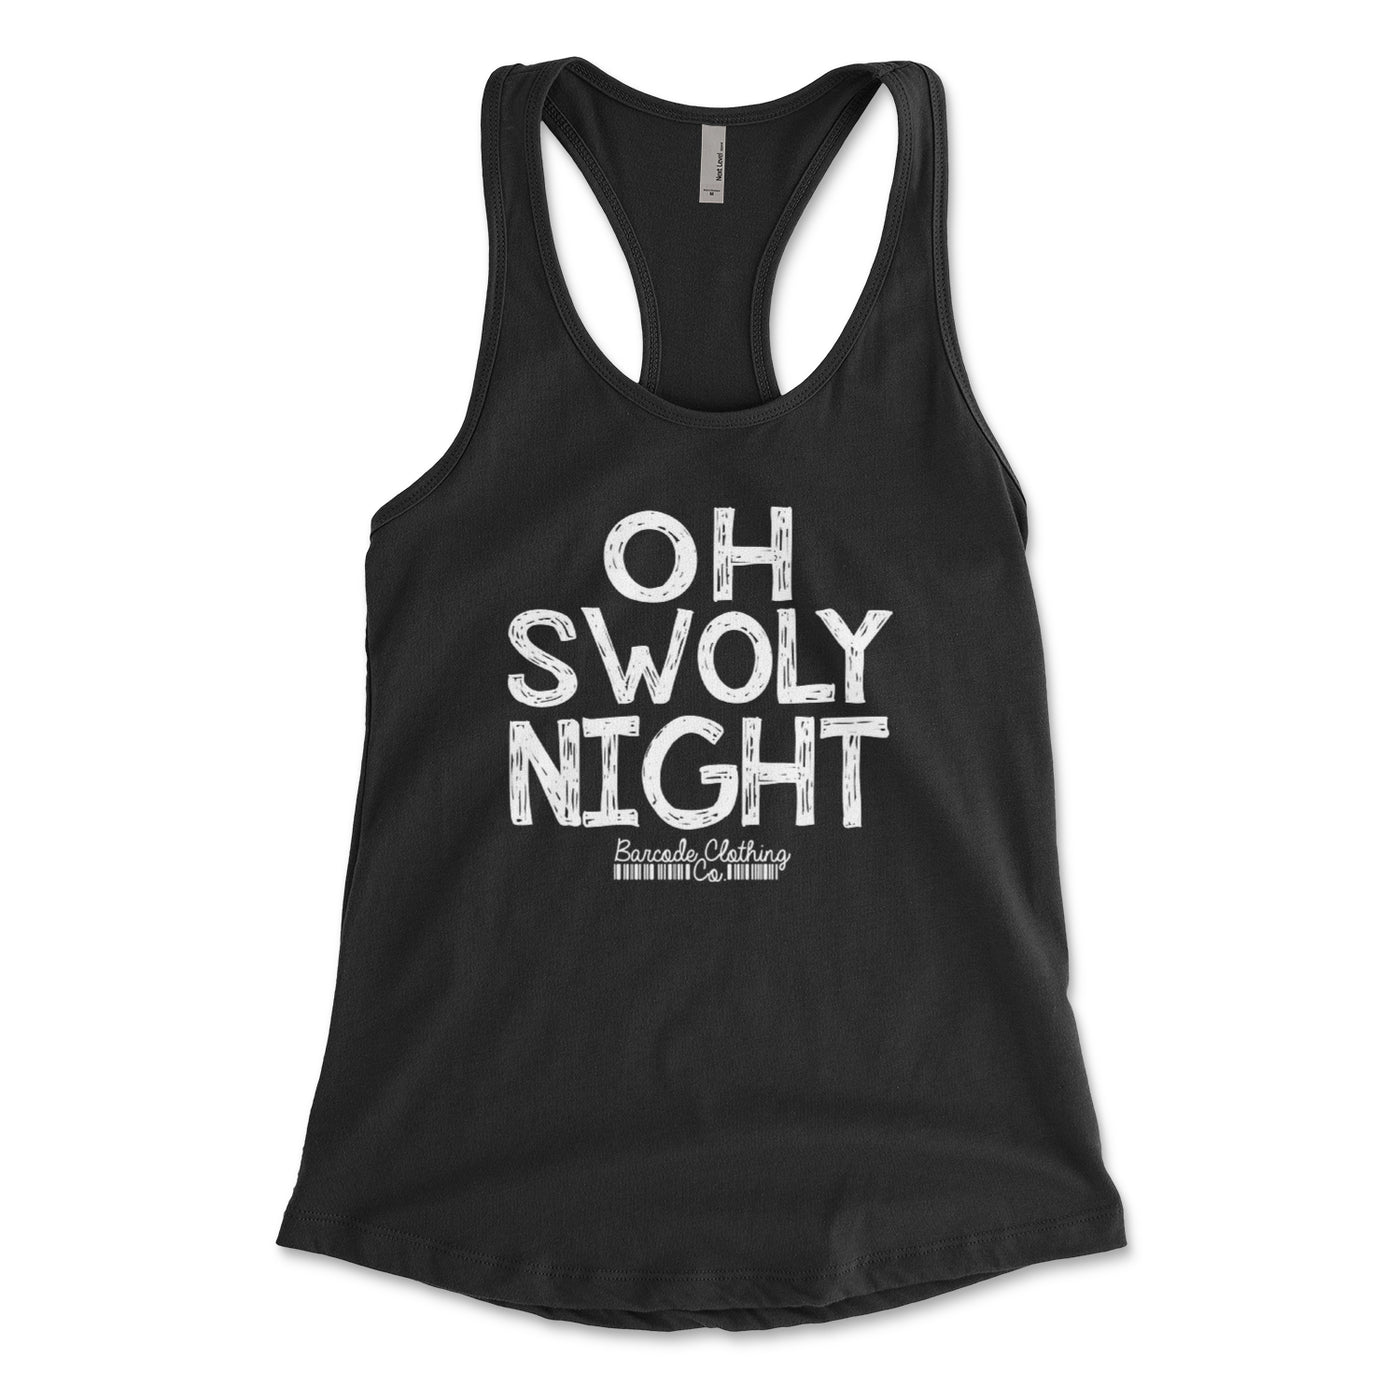 Oh Swoly Night